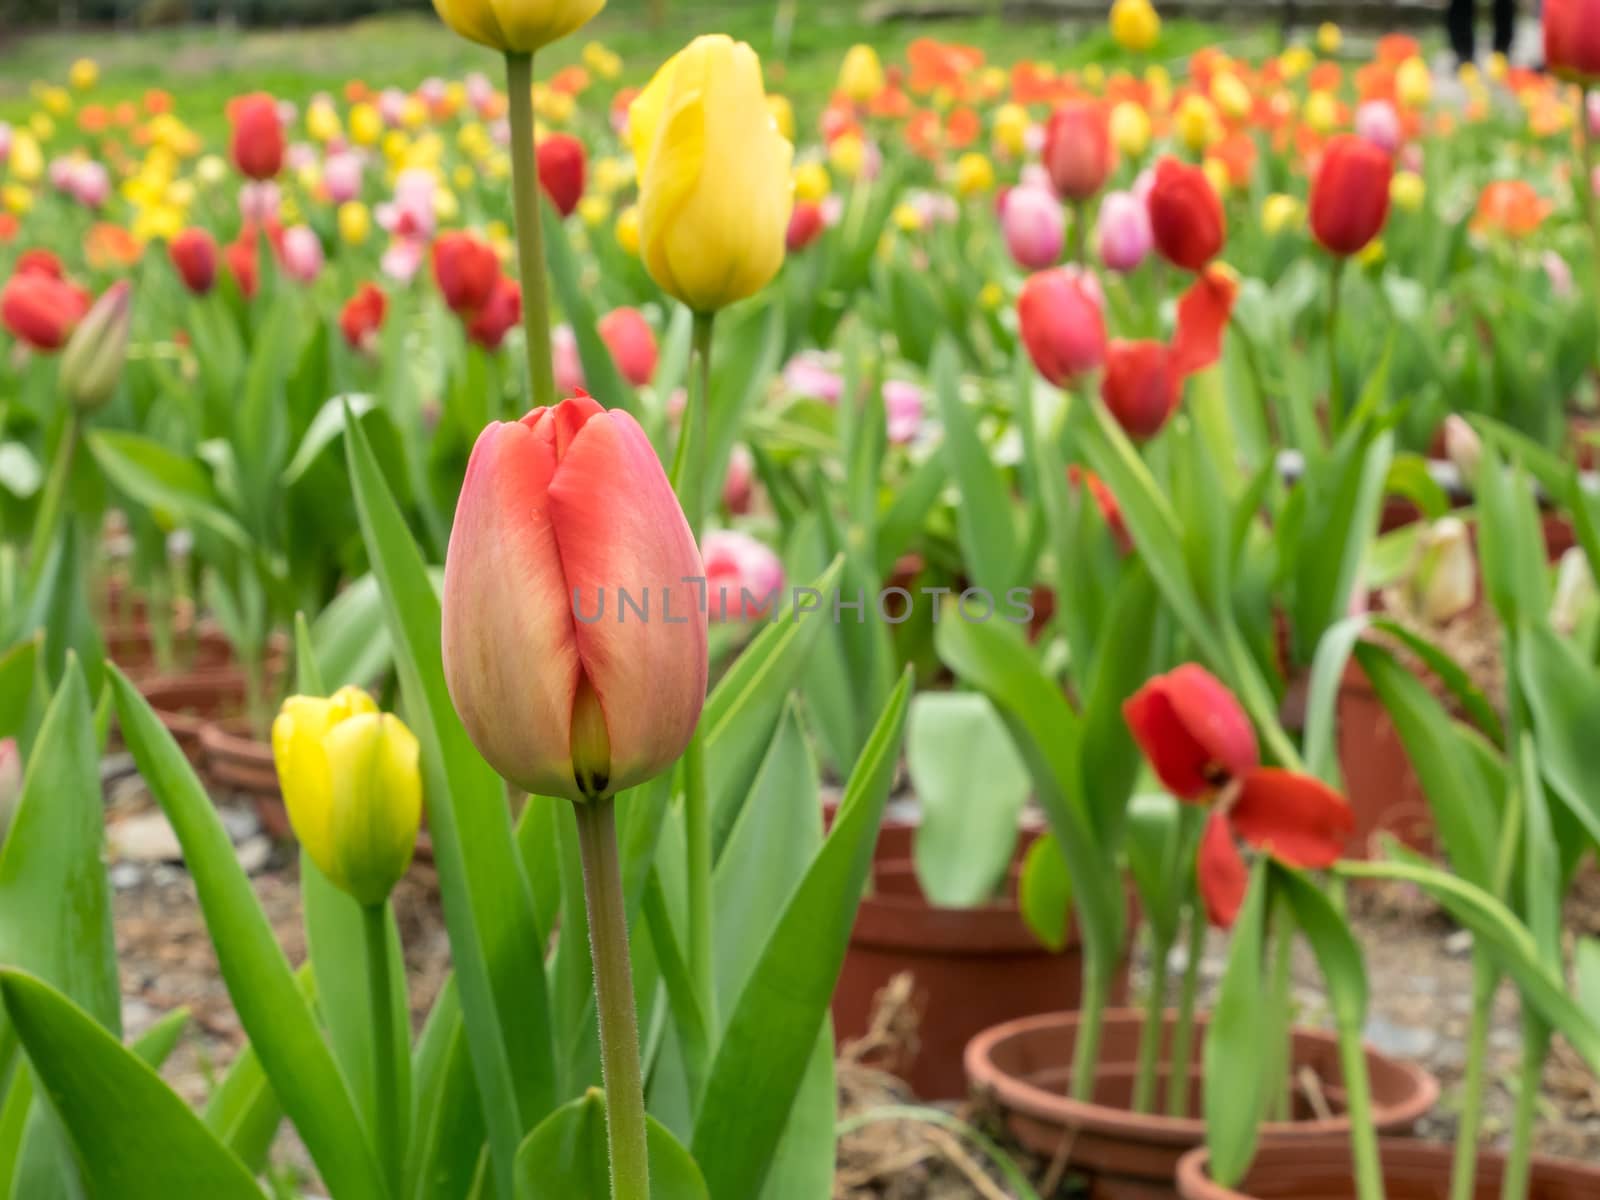 The group of beautiful red and yellow tulips flower at the garden in the morning.